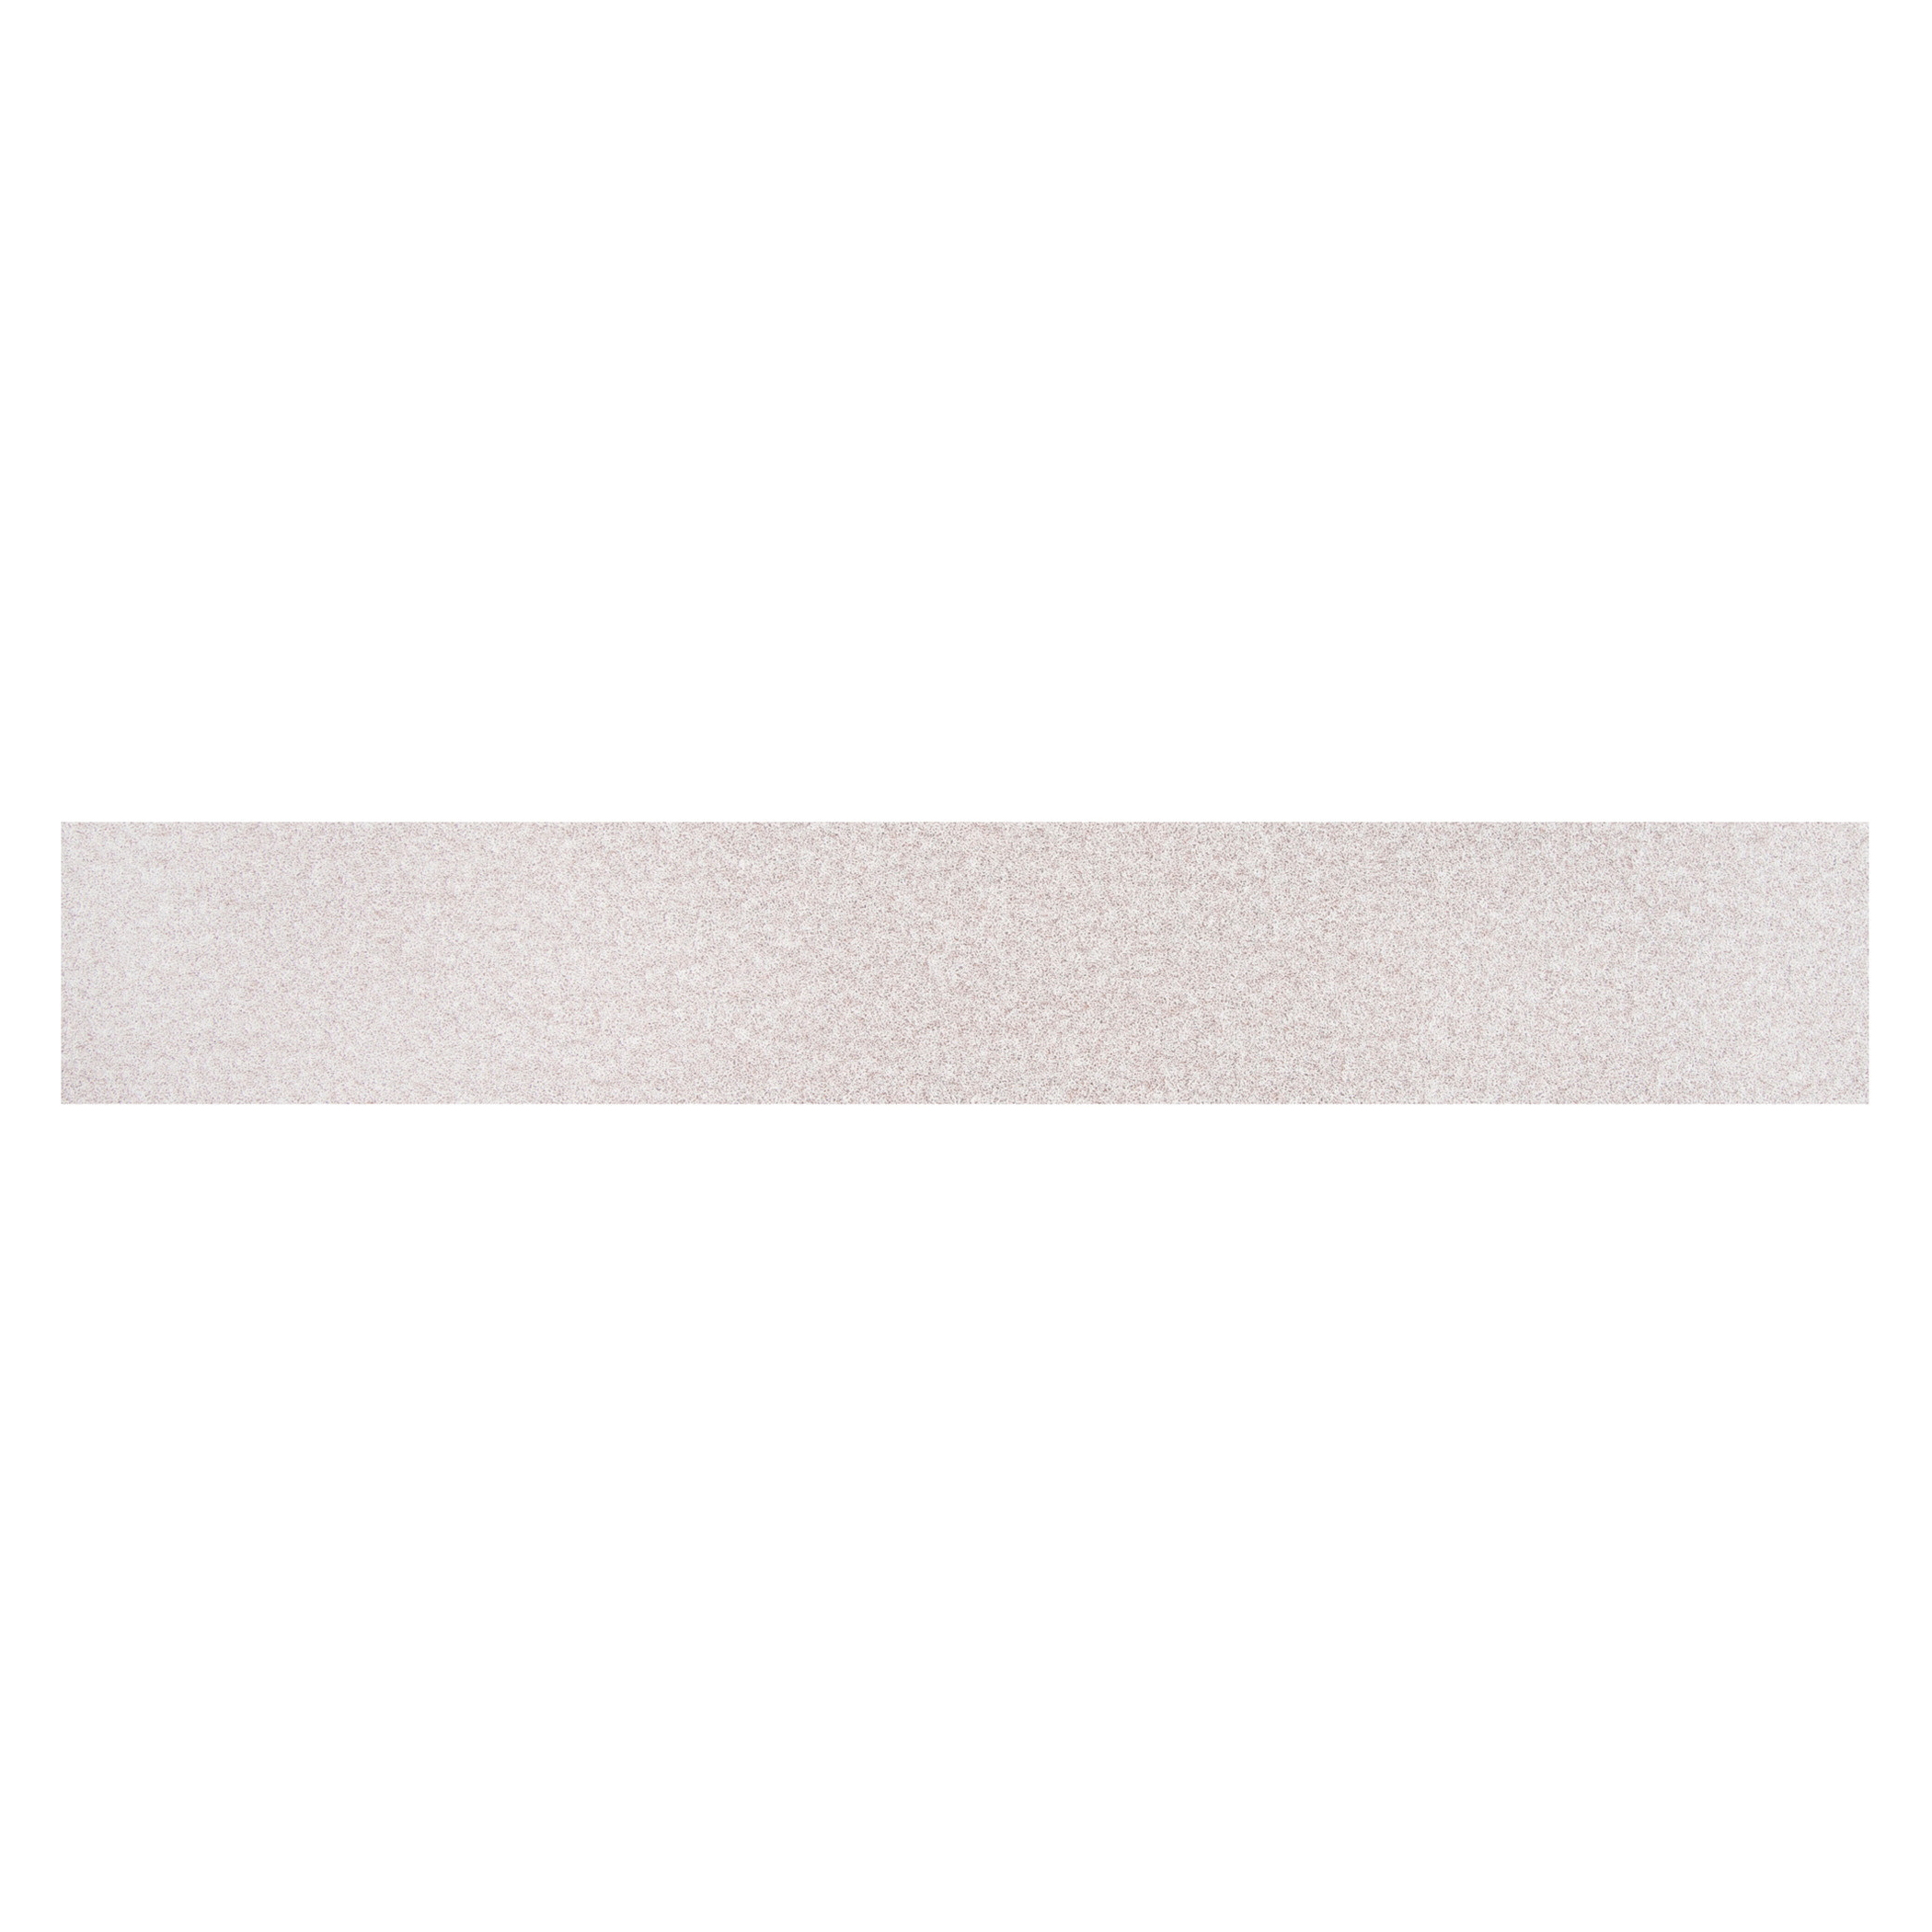 Norton® 66261131642 A275OP Hook and Loop Coated File Strip, 16-1/2 in L x 2-3/4 in W, P180 Grit, Fine Grade, Aluminum Oxide Abrasive, Anti-Loading Paper Backing